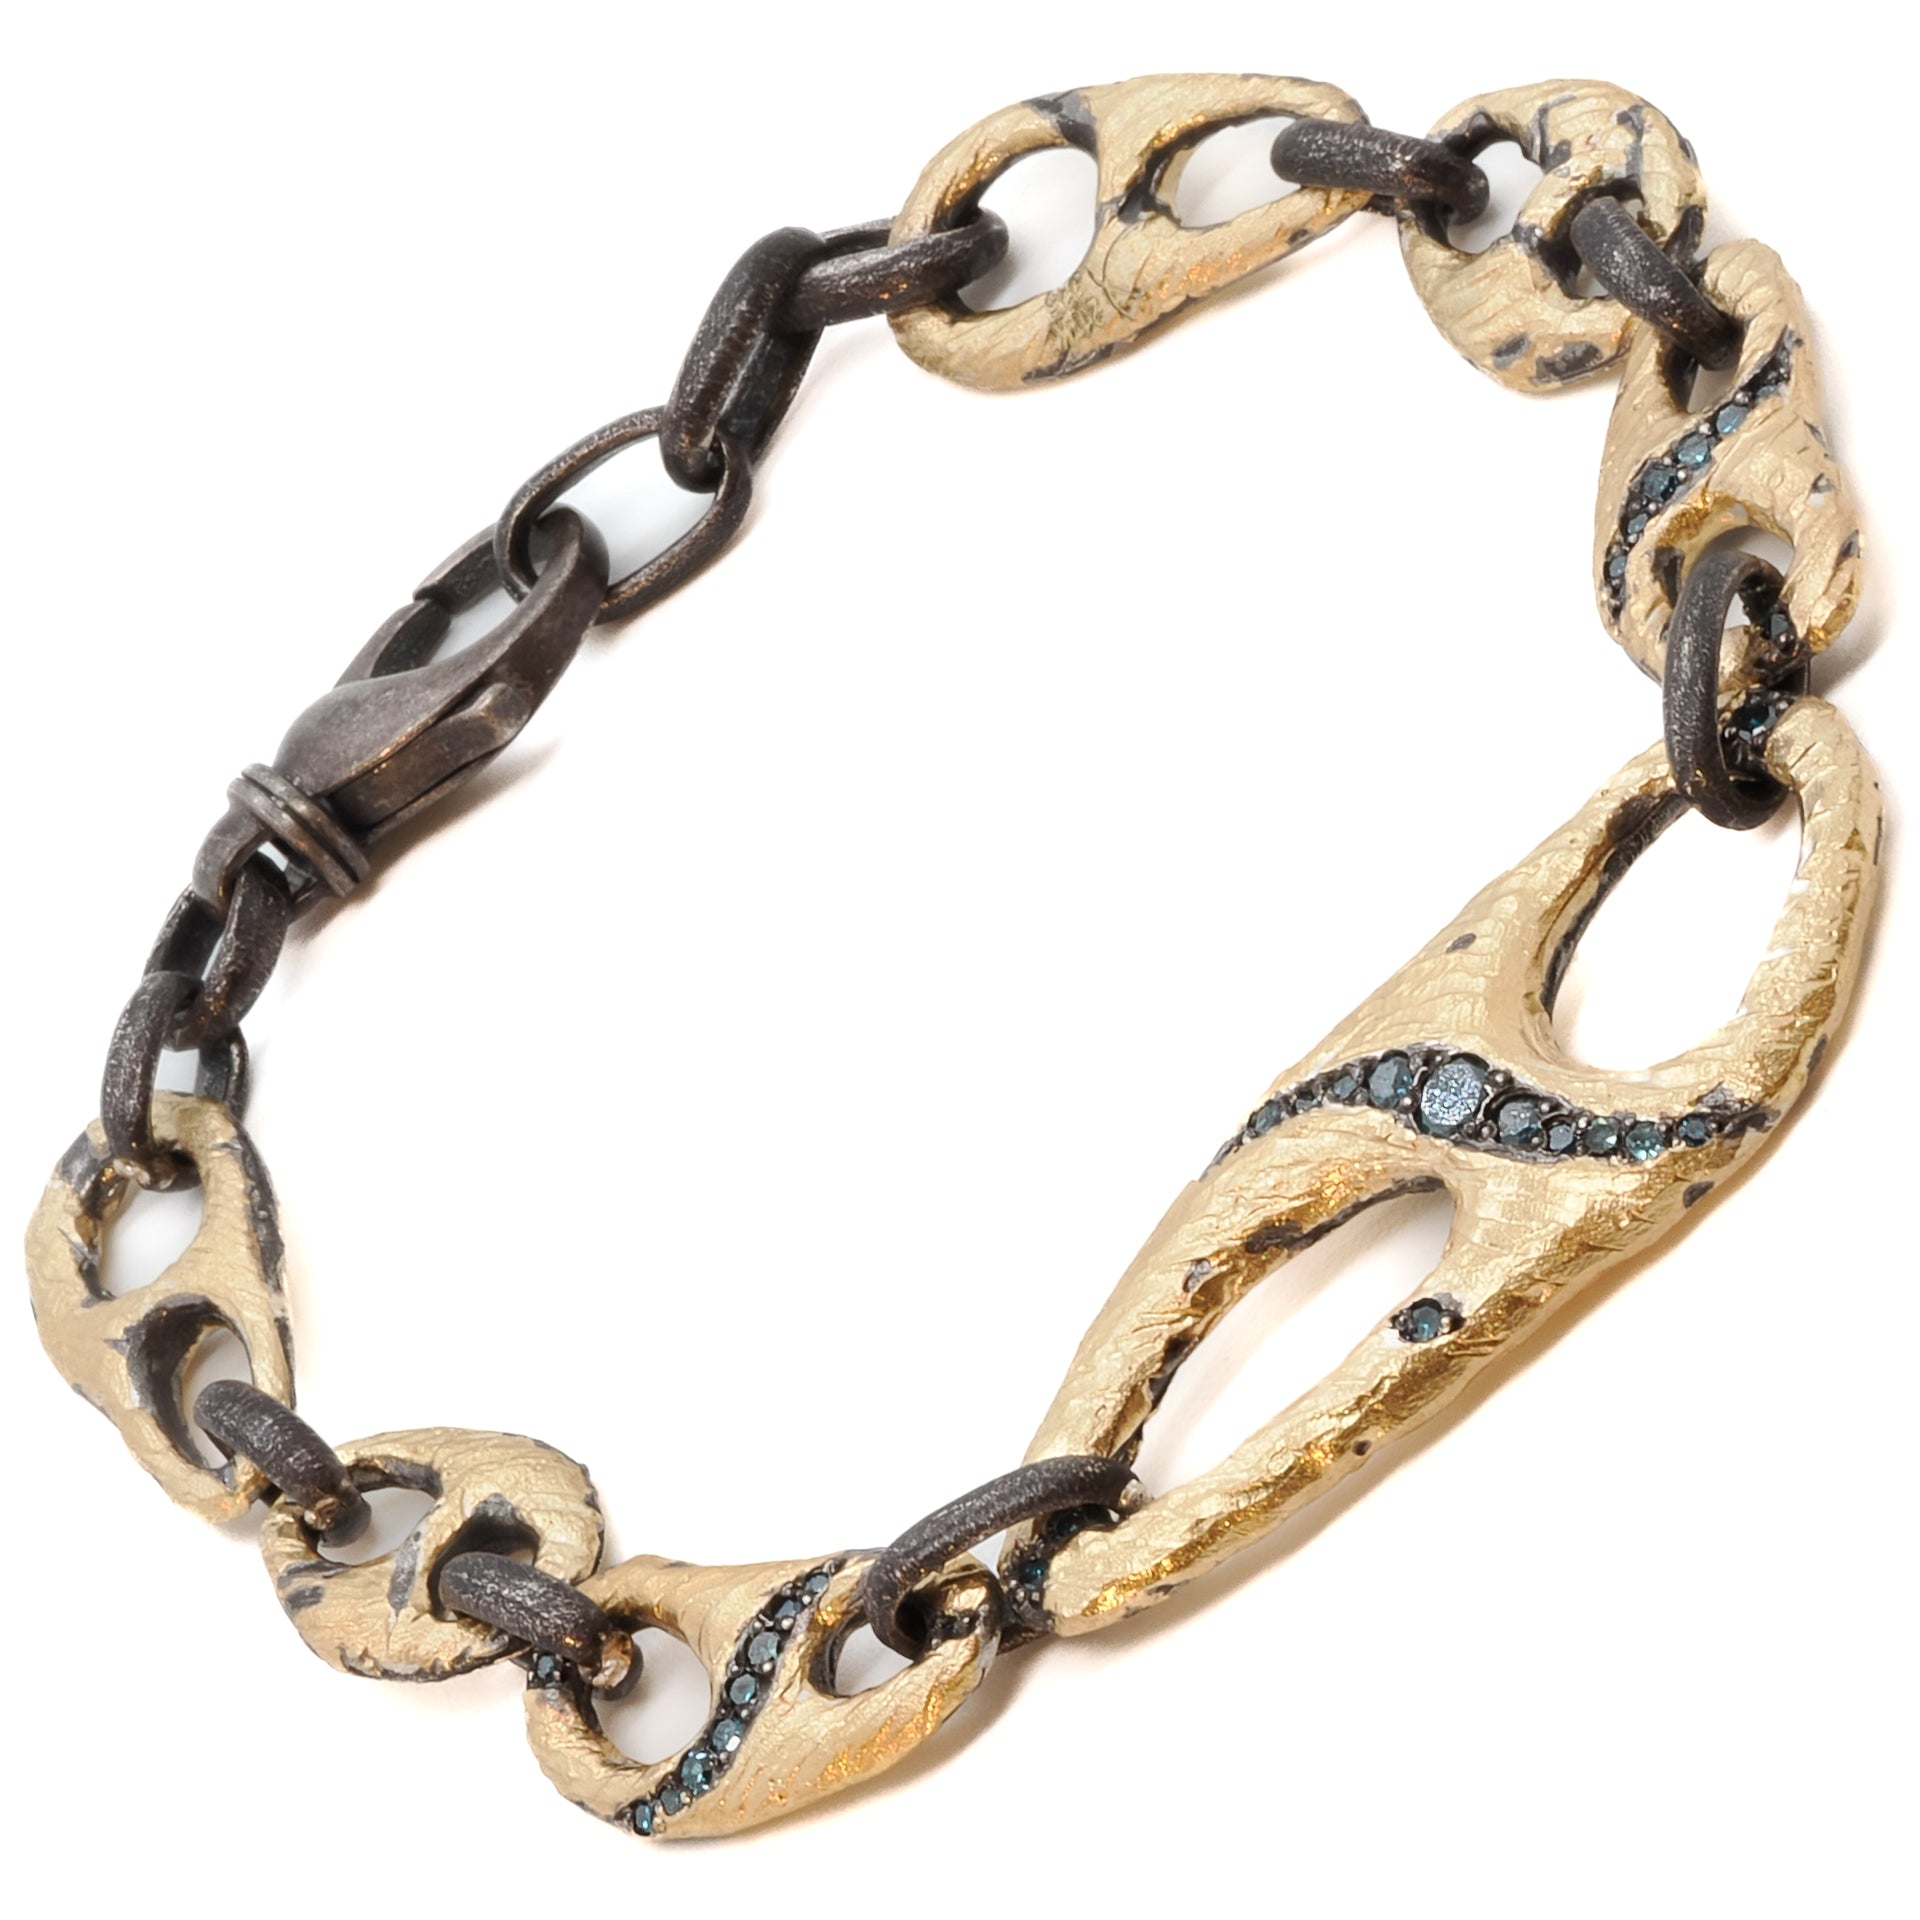 High-Quality Craftsmanship - Nature Uneven Bracelet with rough silver and gold surfaces.